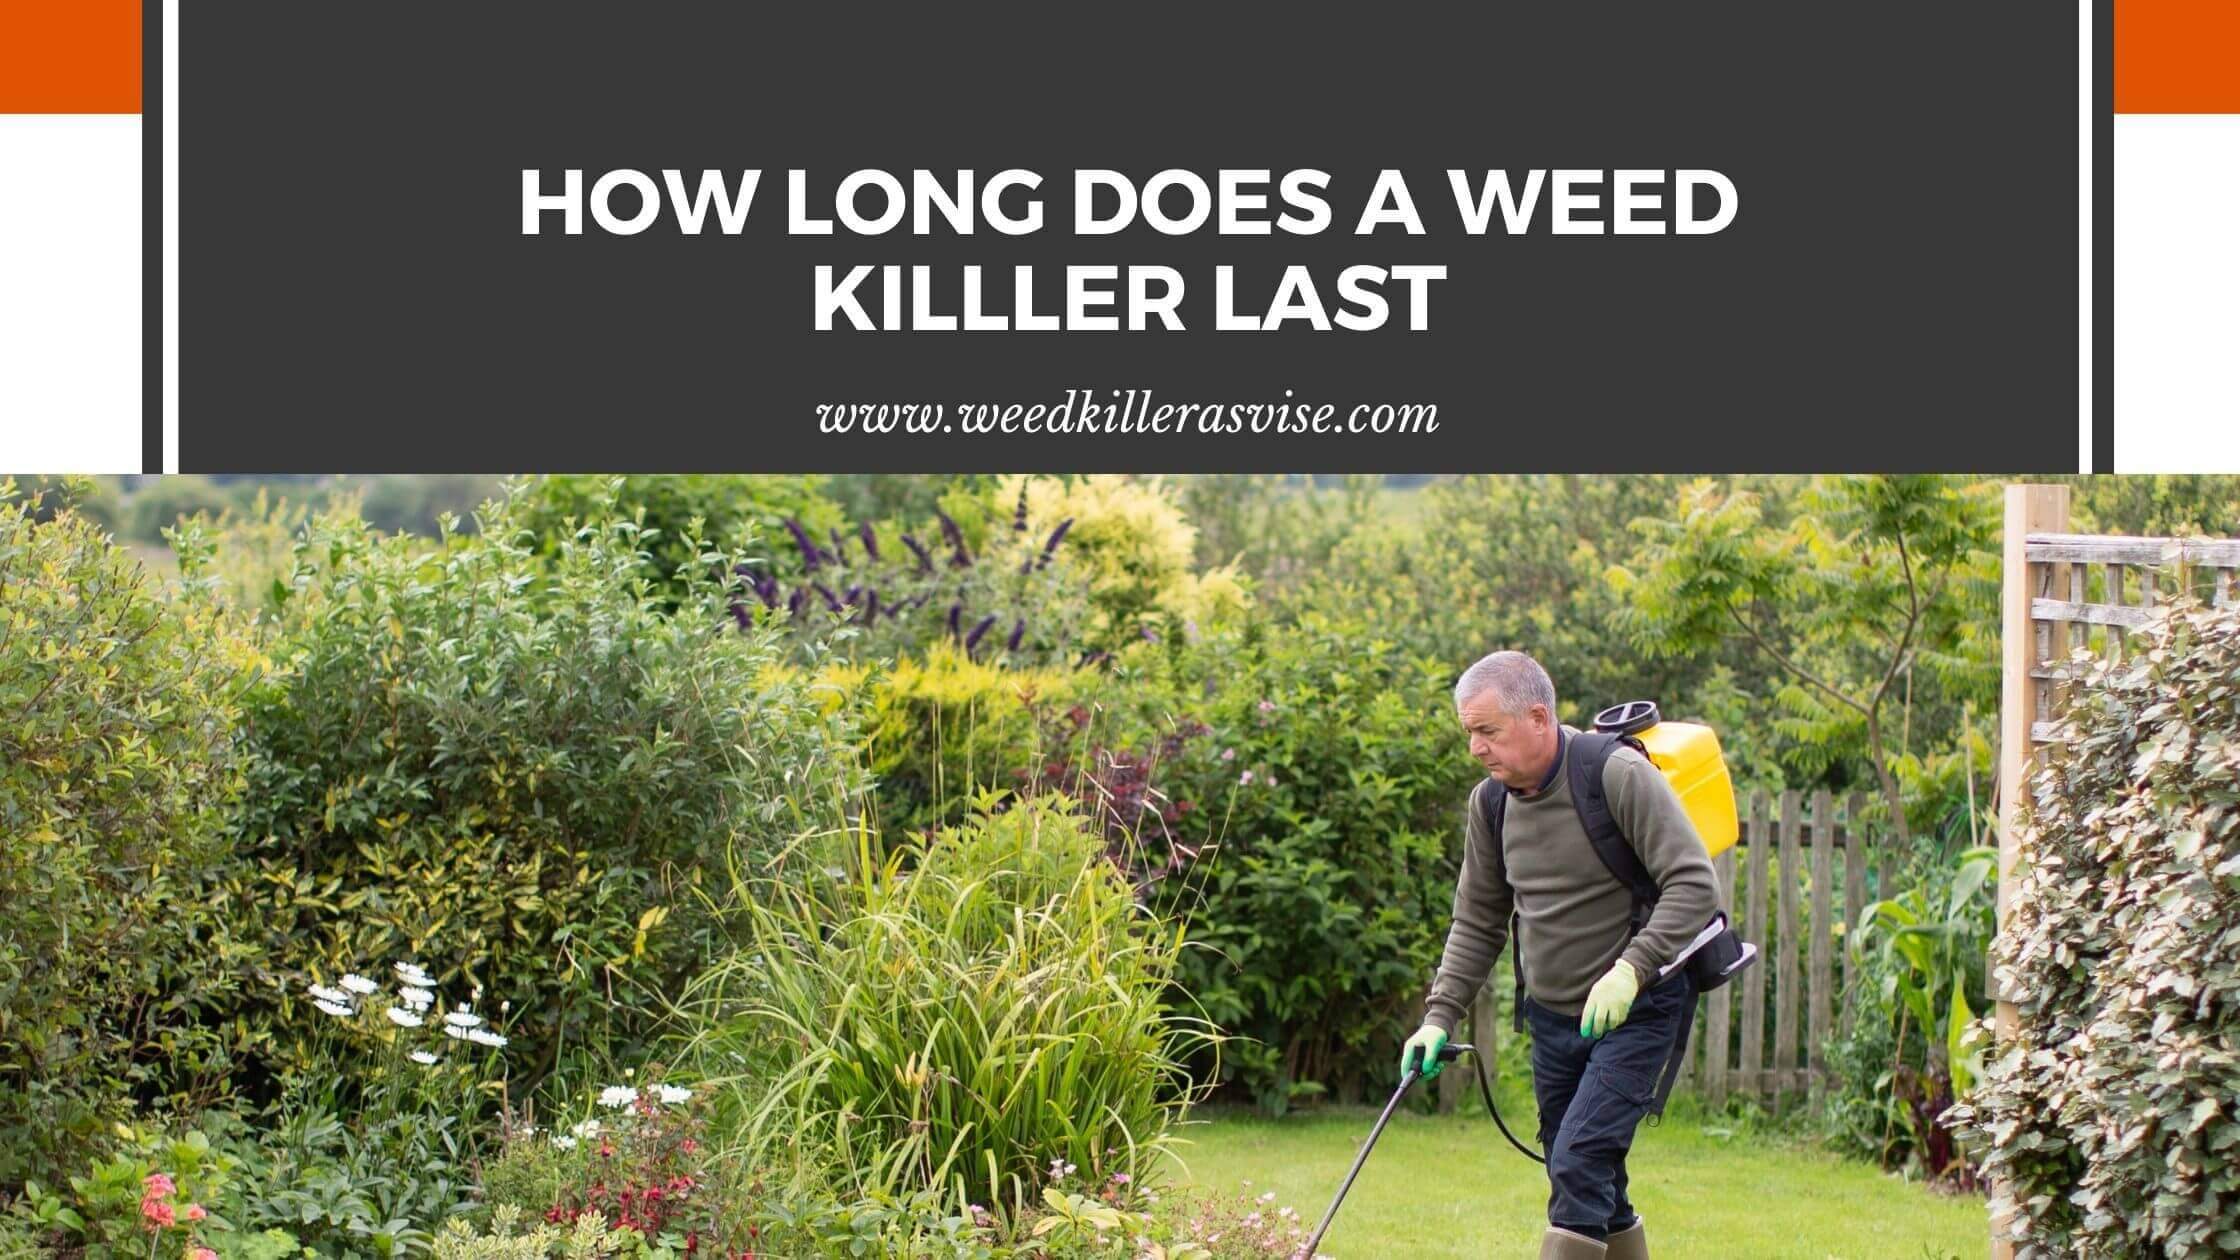 How Long Does Weed Killer Last- A Complete Guide by Weed Killer Advise